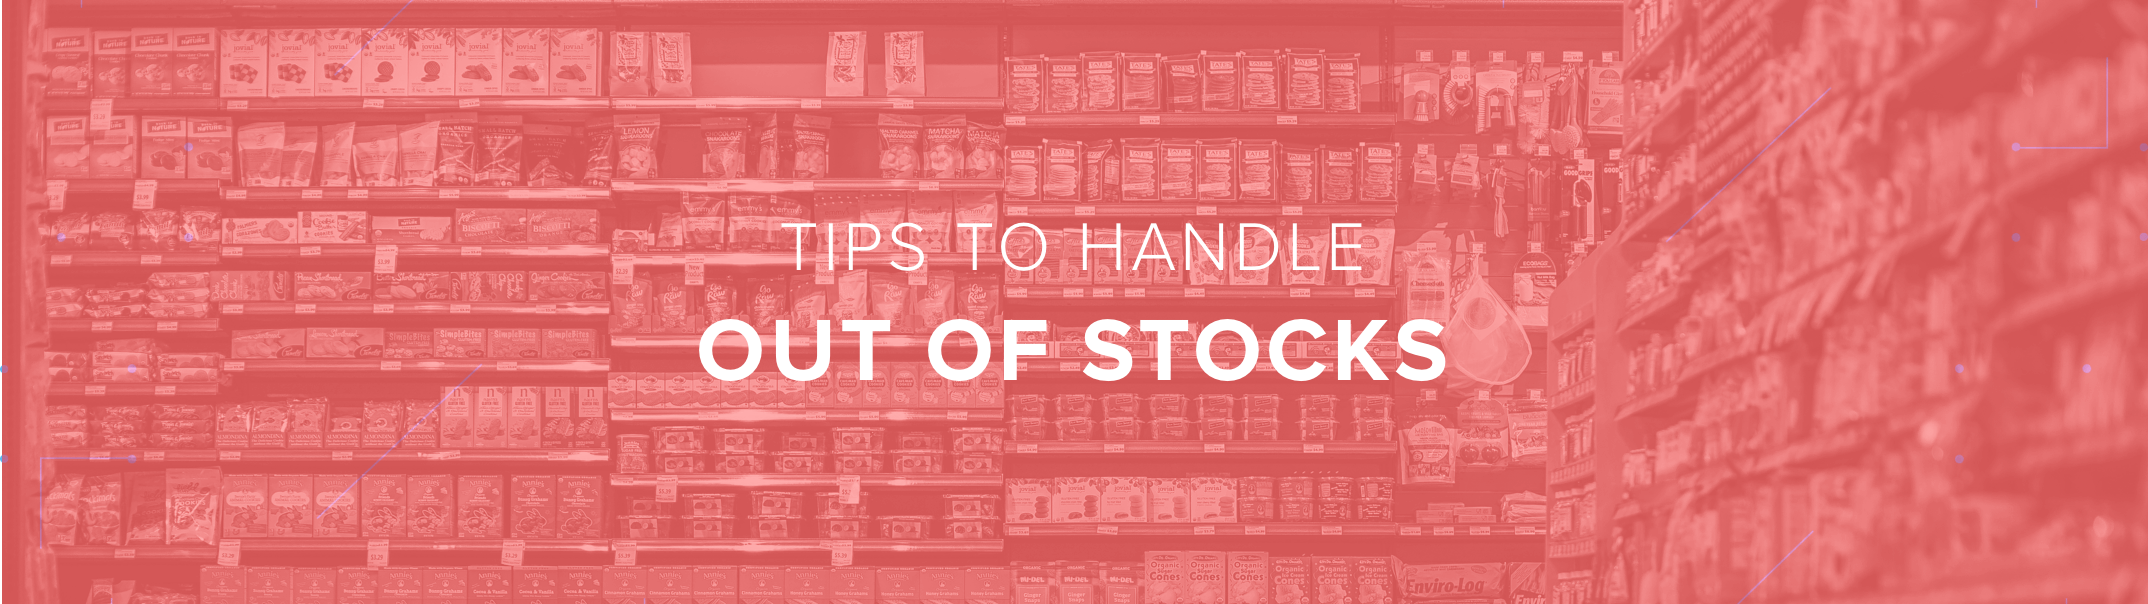 tips to handle out of stocks with a grocery aisle in the background